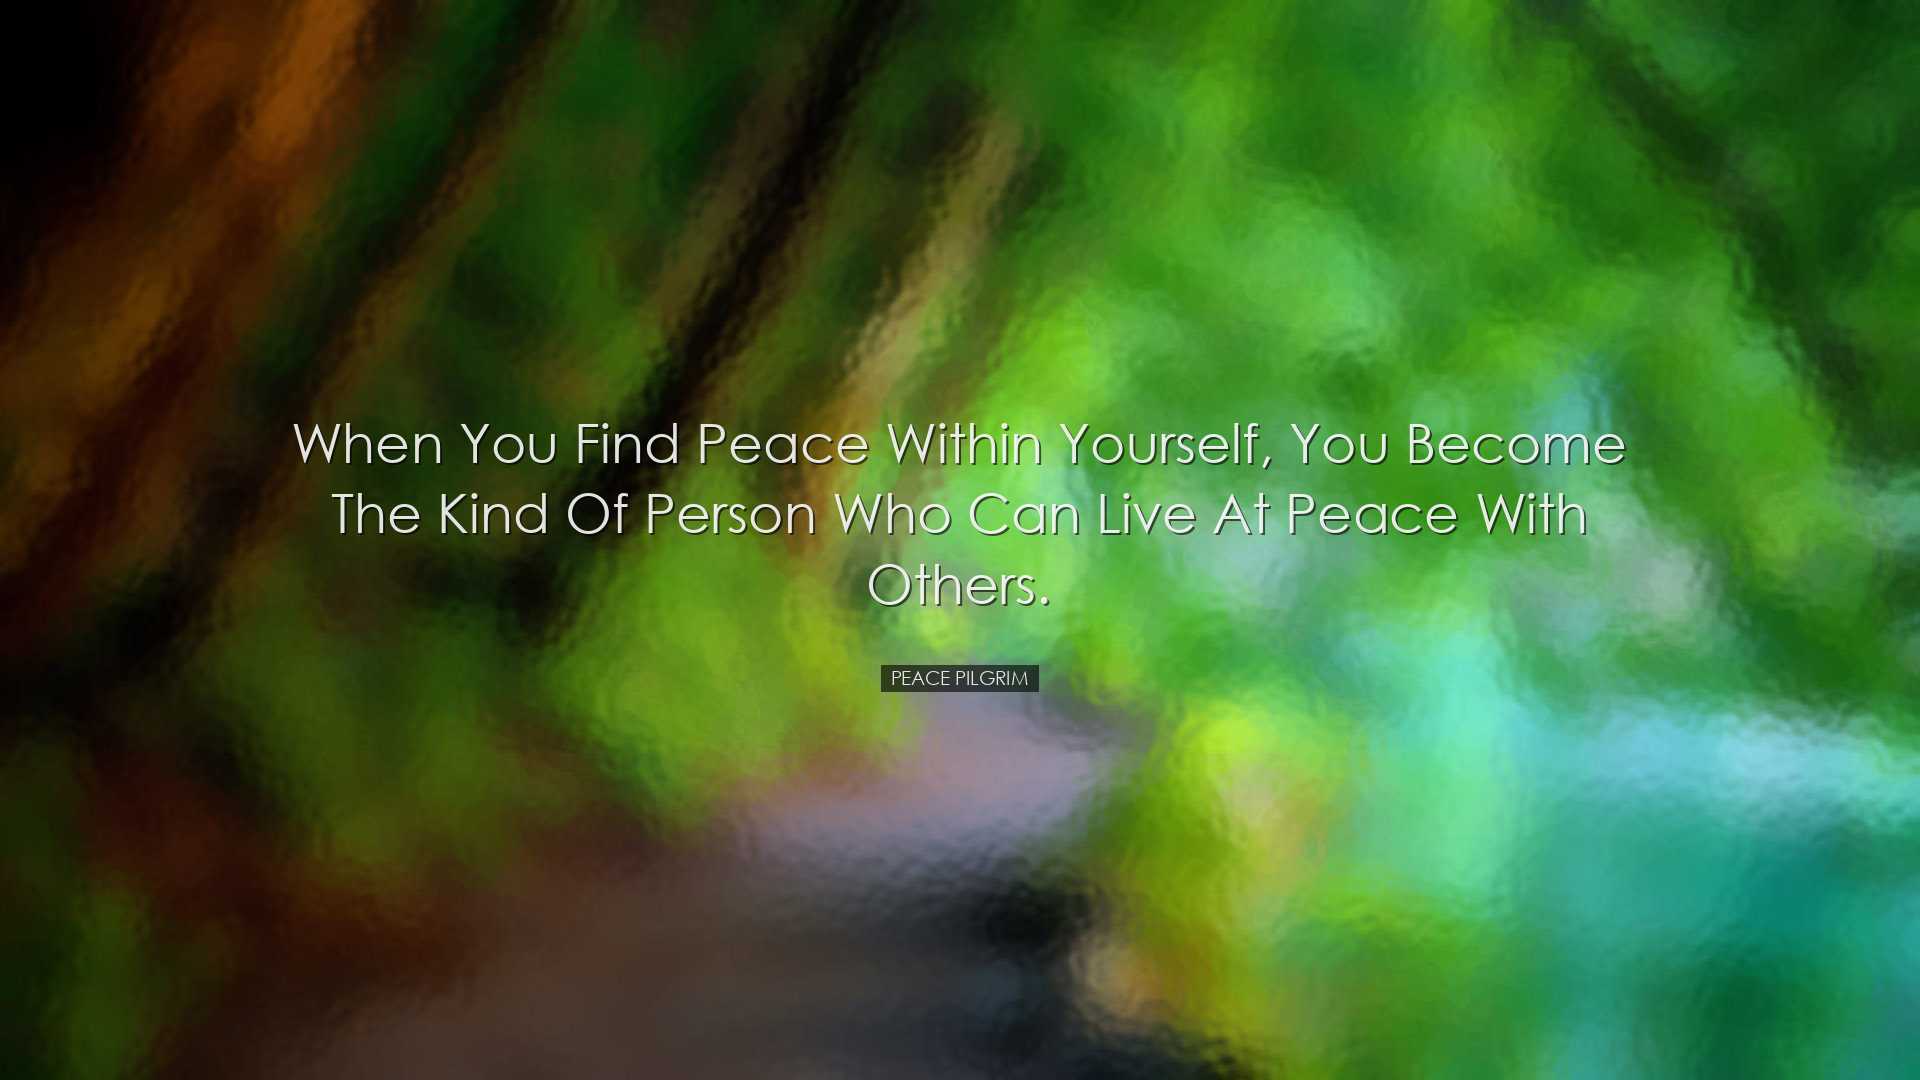 When you find peace within yourself, you become the kind of person